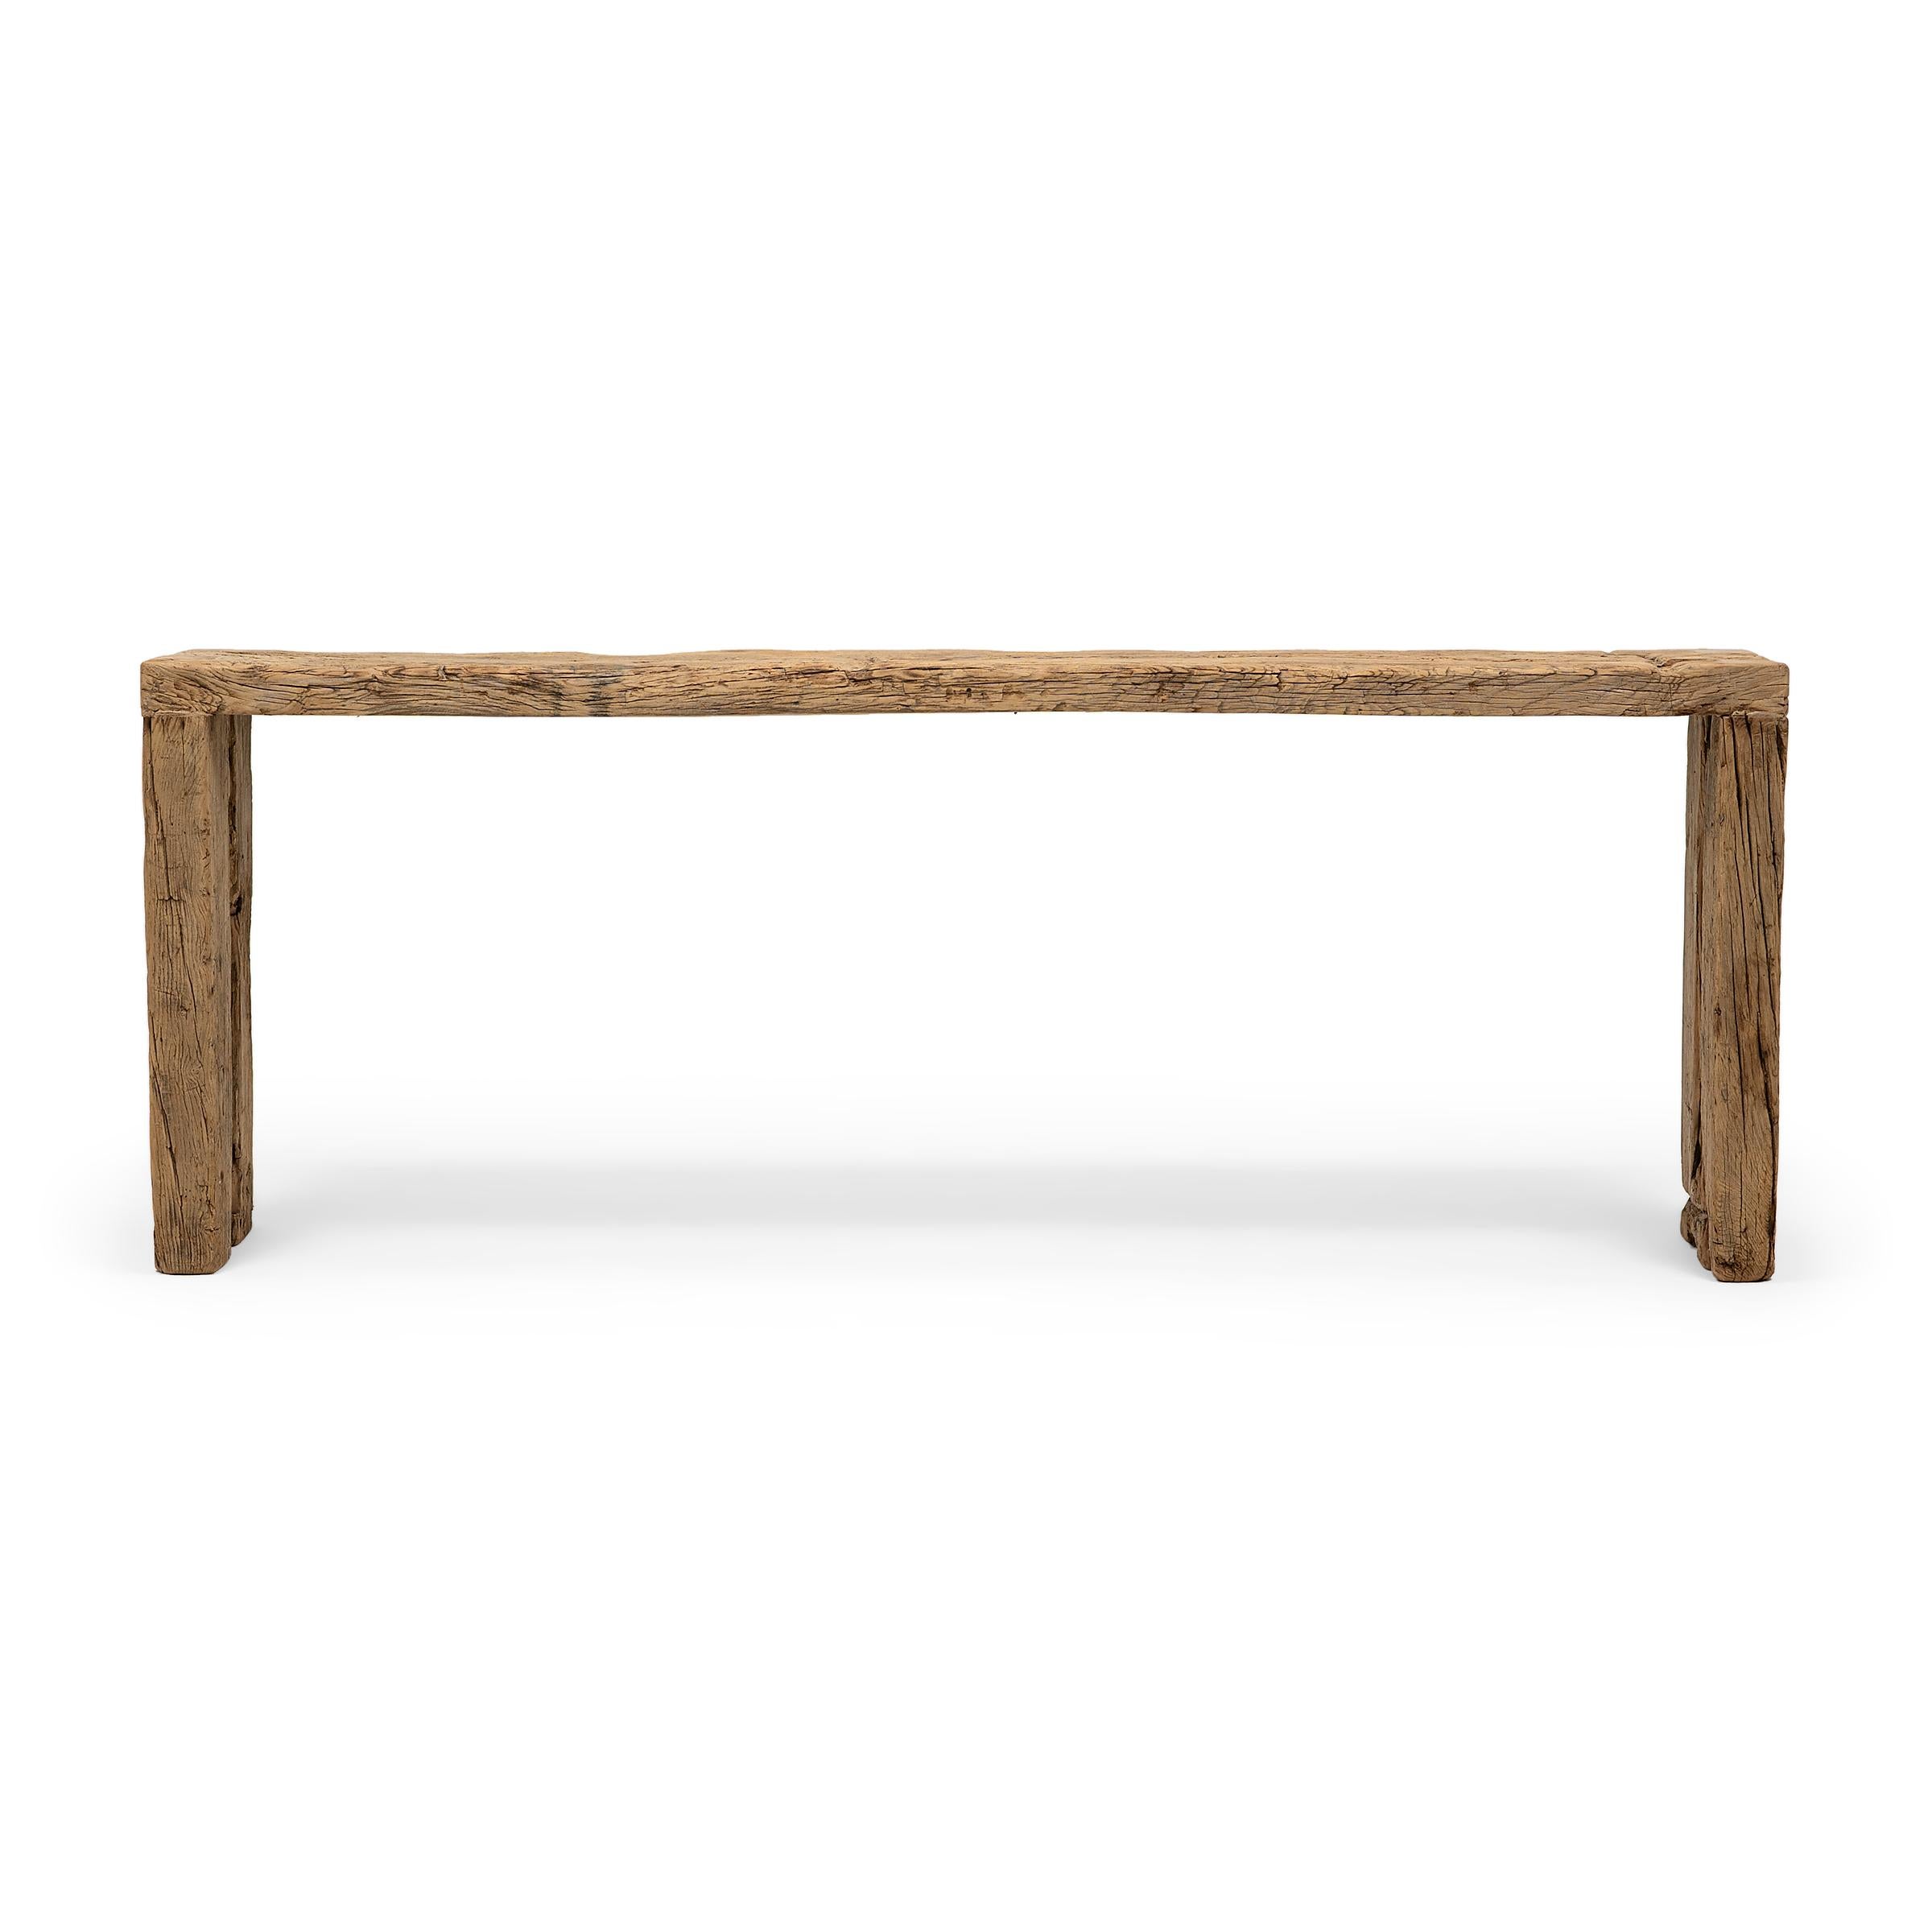 This artisan-crafted console table is a celebration of wabi-sabi style. Crafted of elmwood timbers reclaimed from Qing-dynasty architecture, the table has a minimalist waterfall design and is left unfinished to preserve the natural beauty of its